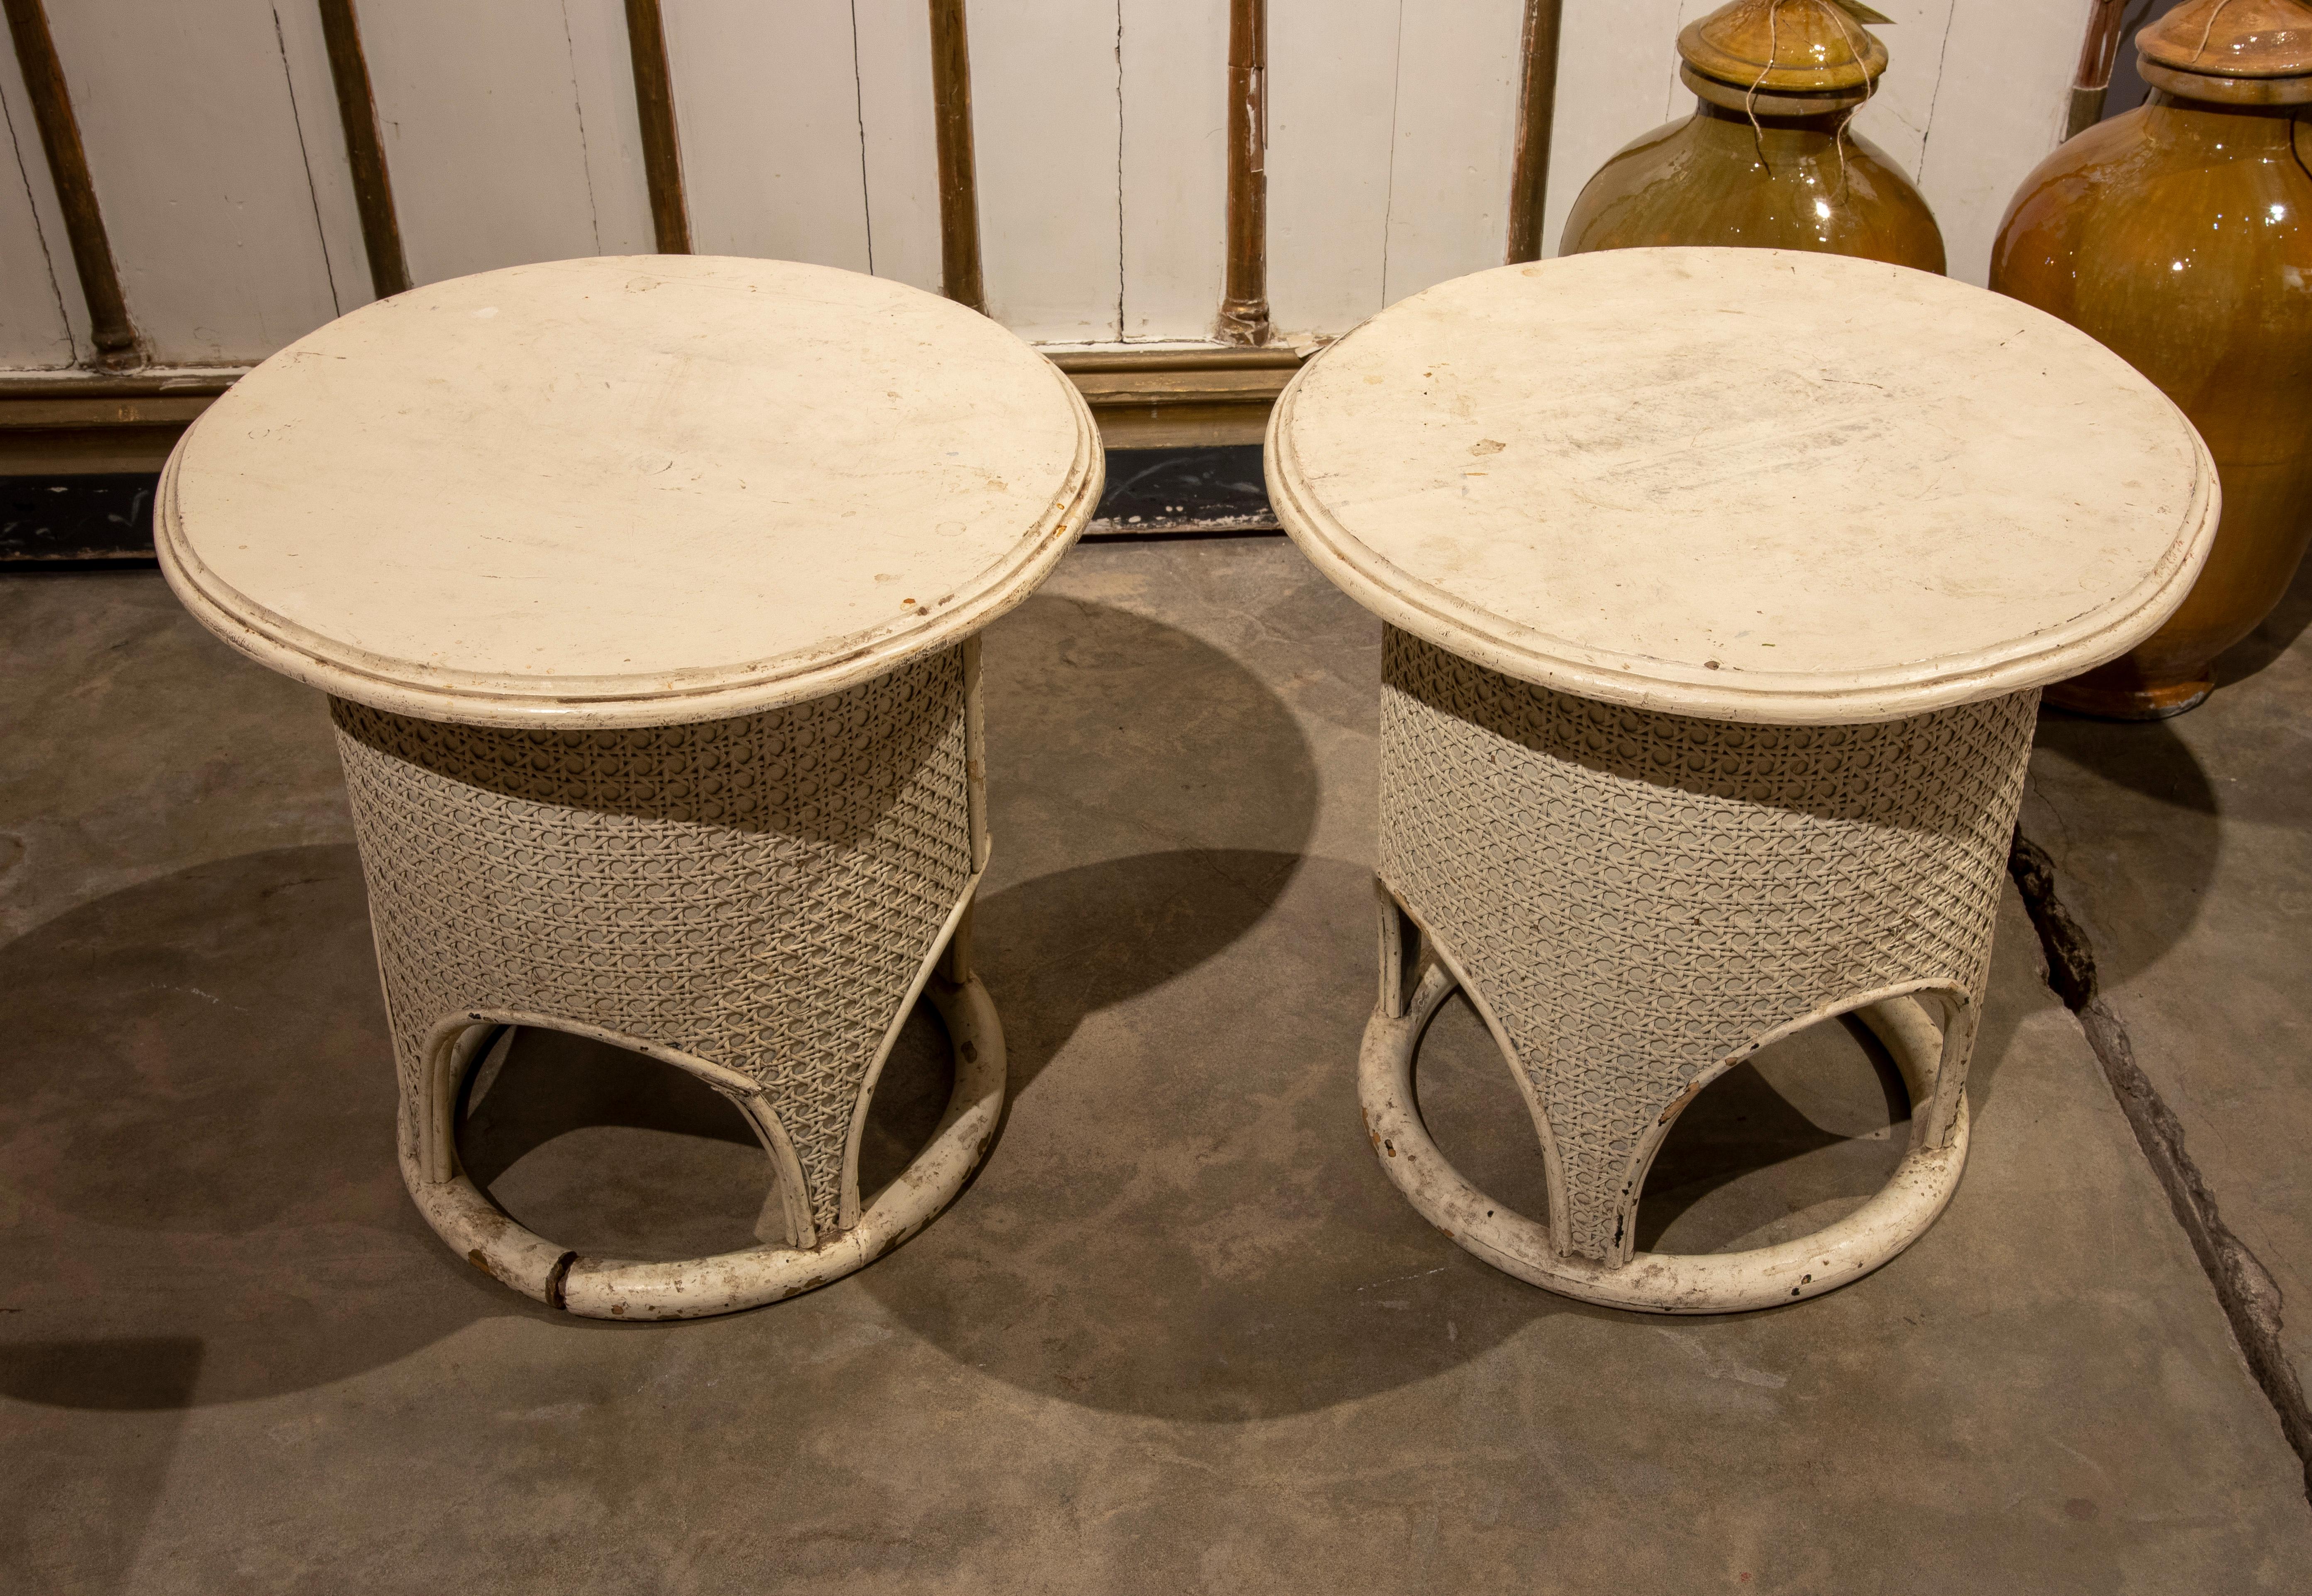 1970s pair of round wooden side tables with wicker.